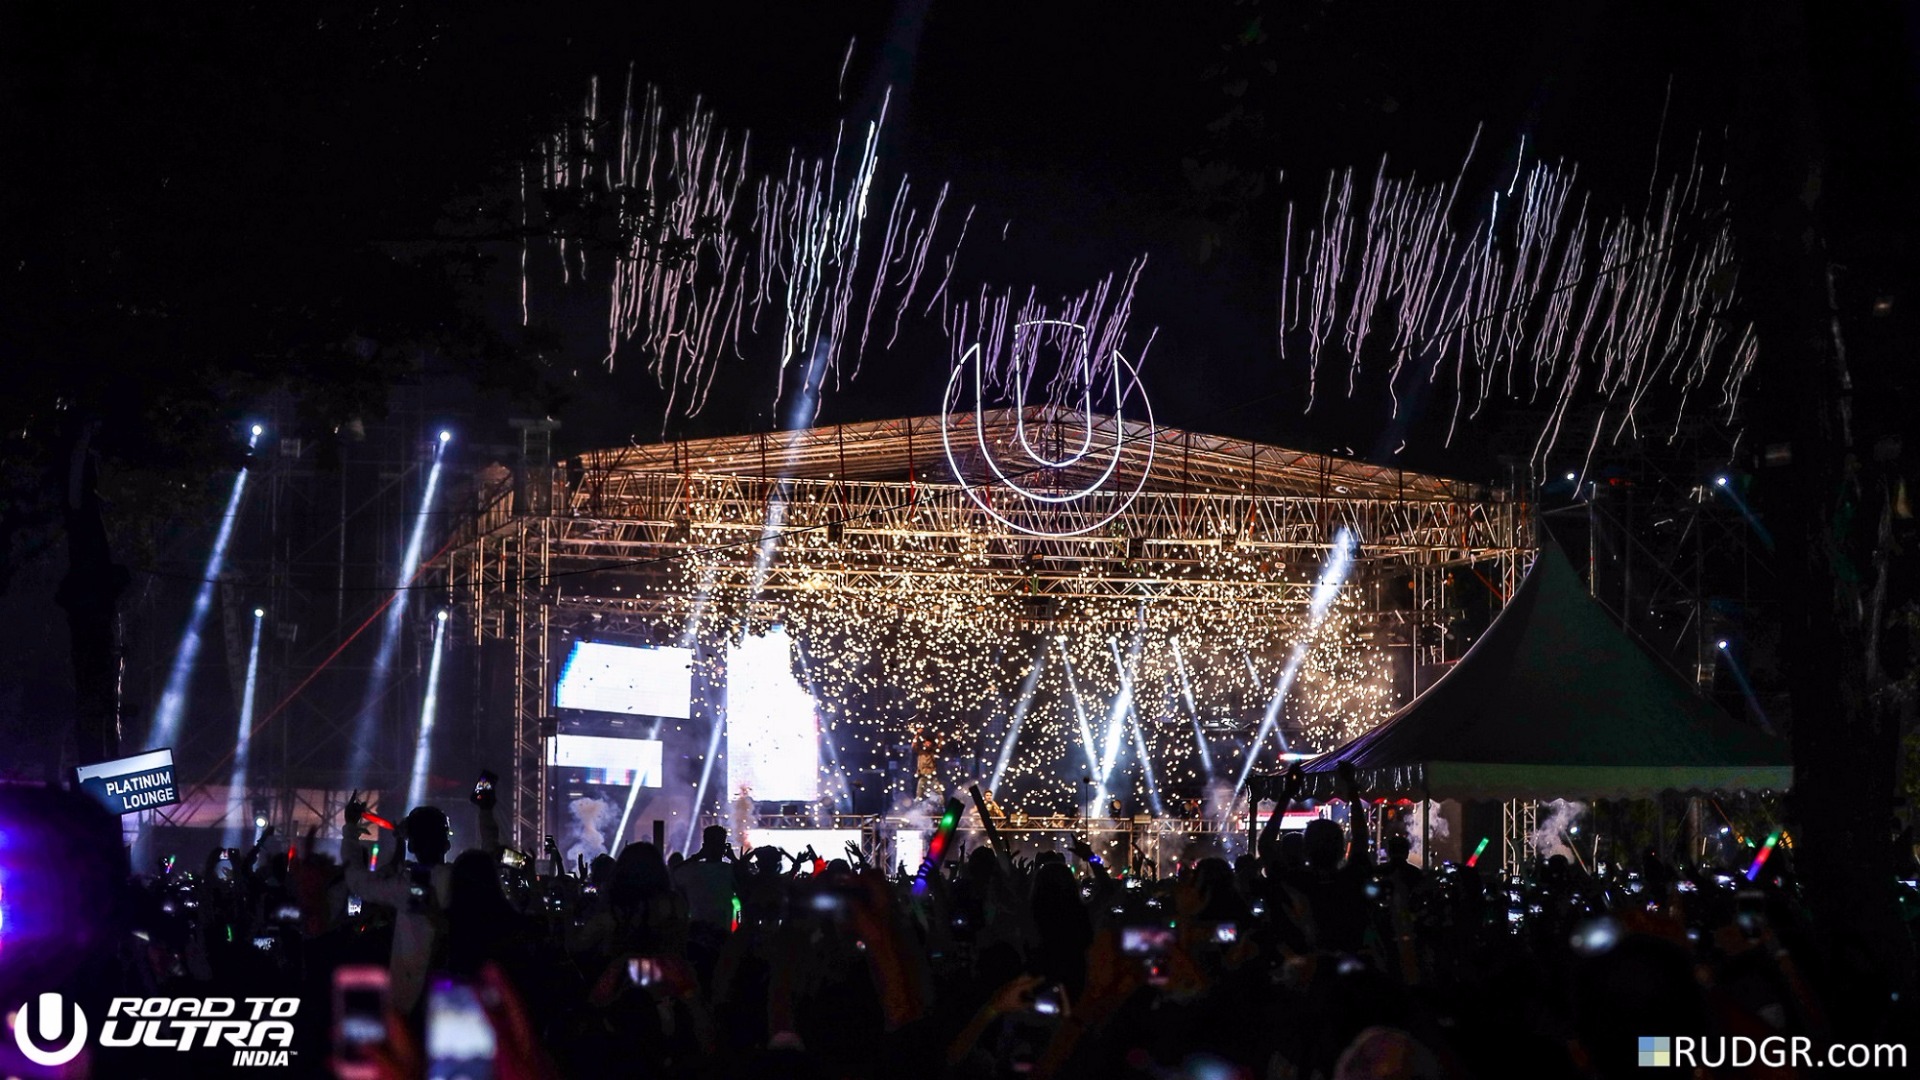 Star Dimensions Lights Historic Road to Ultra Show in Mumbai with Elation LightingGallery Image road to ultra mumbai 2 